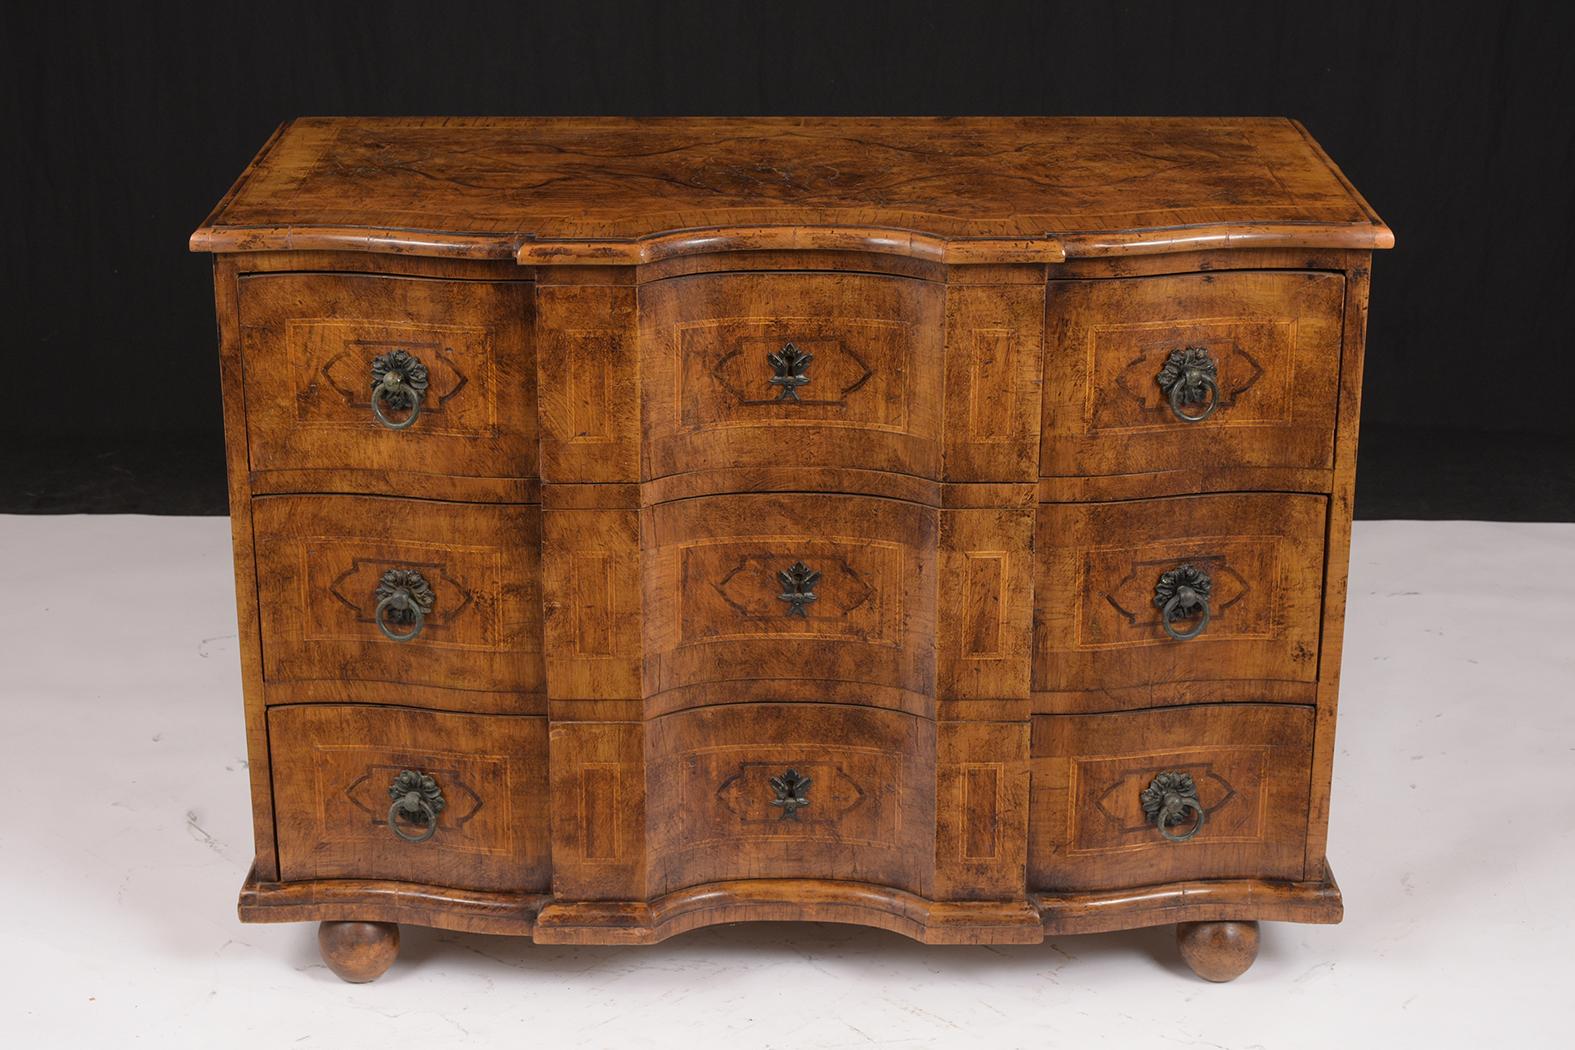 This antique Italian Baroque style commode features a beautiful walnut & burl marquetry veneer design along the top, drawers, and sides. The drawers come with two brass Baroque-style handles, a small accent in the center, and the interior is lined